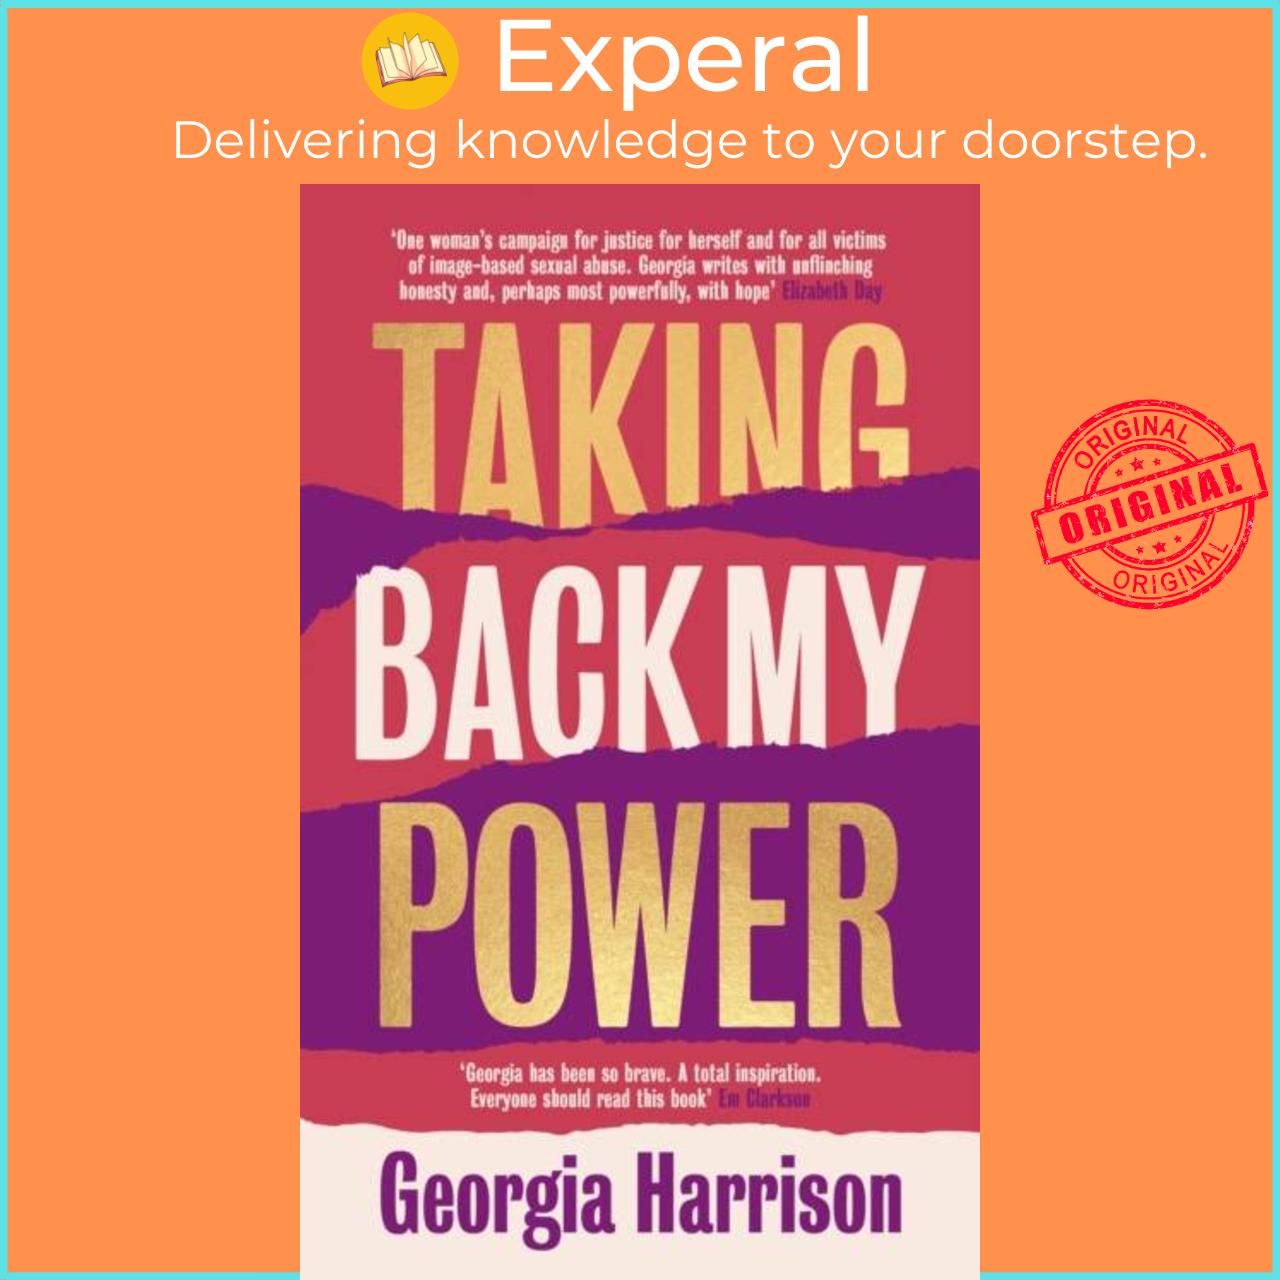 Sách - Taking Back My Power - Our Bodies. Our Consent. by Georgia Harrison (UK edition, hardcover)